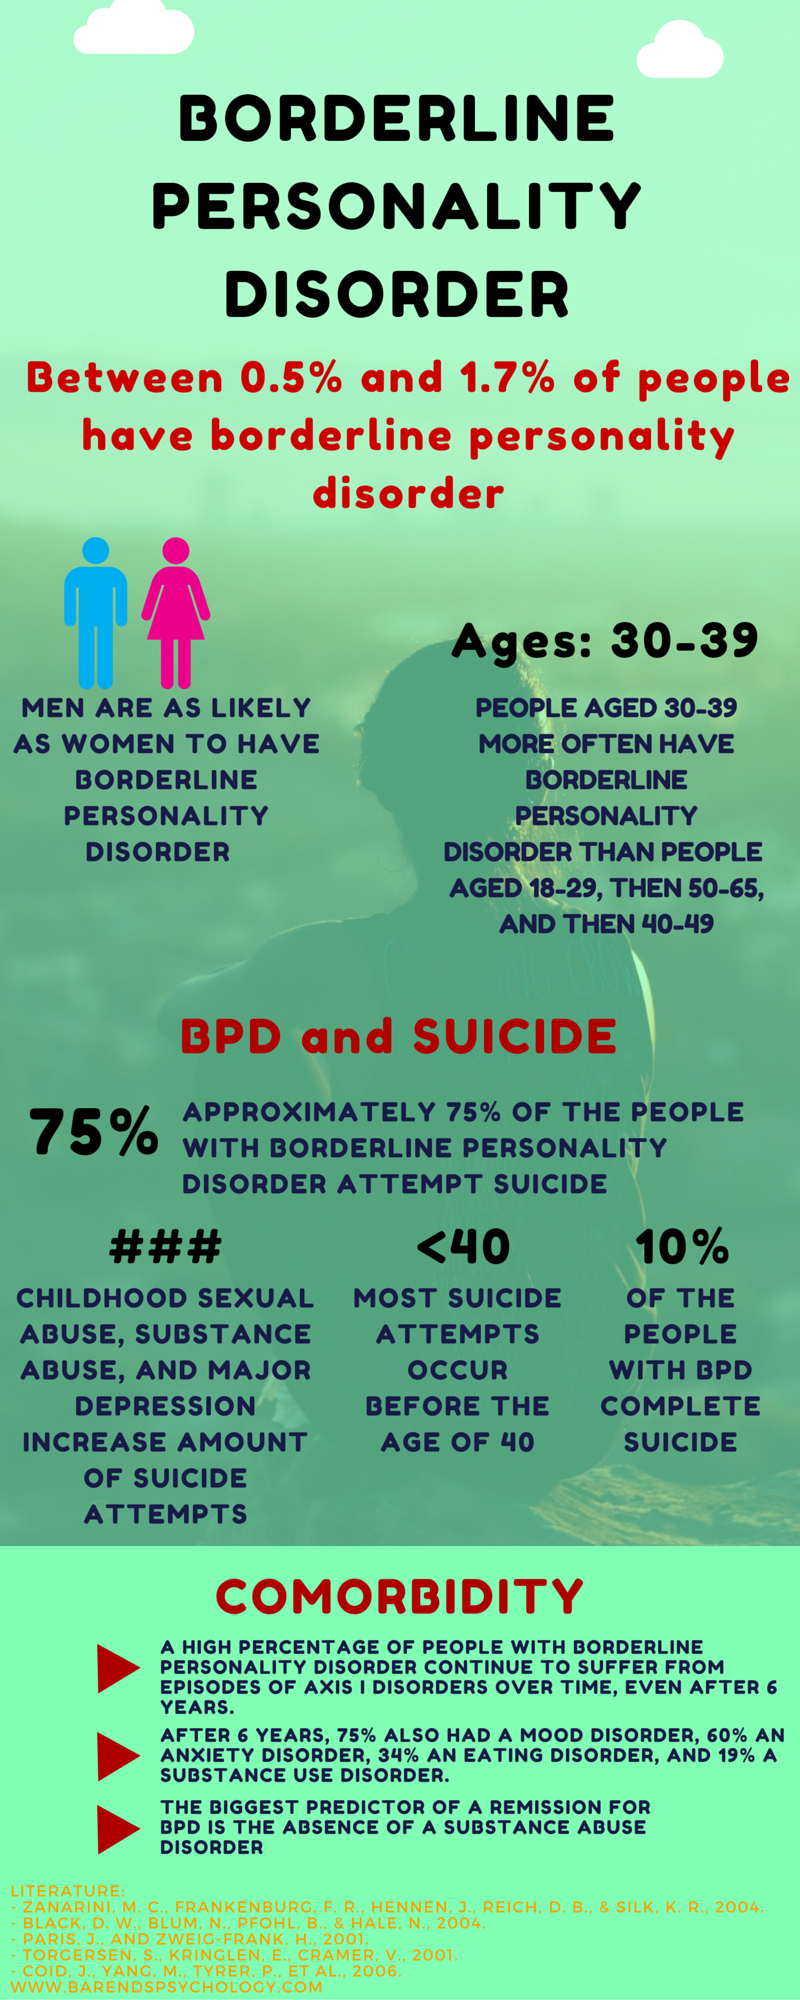 Living with Borderline Personality Disorder (BPD)